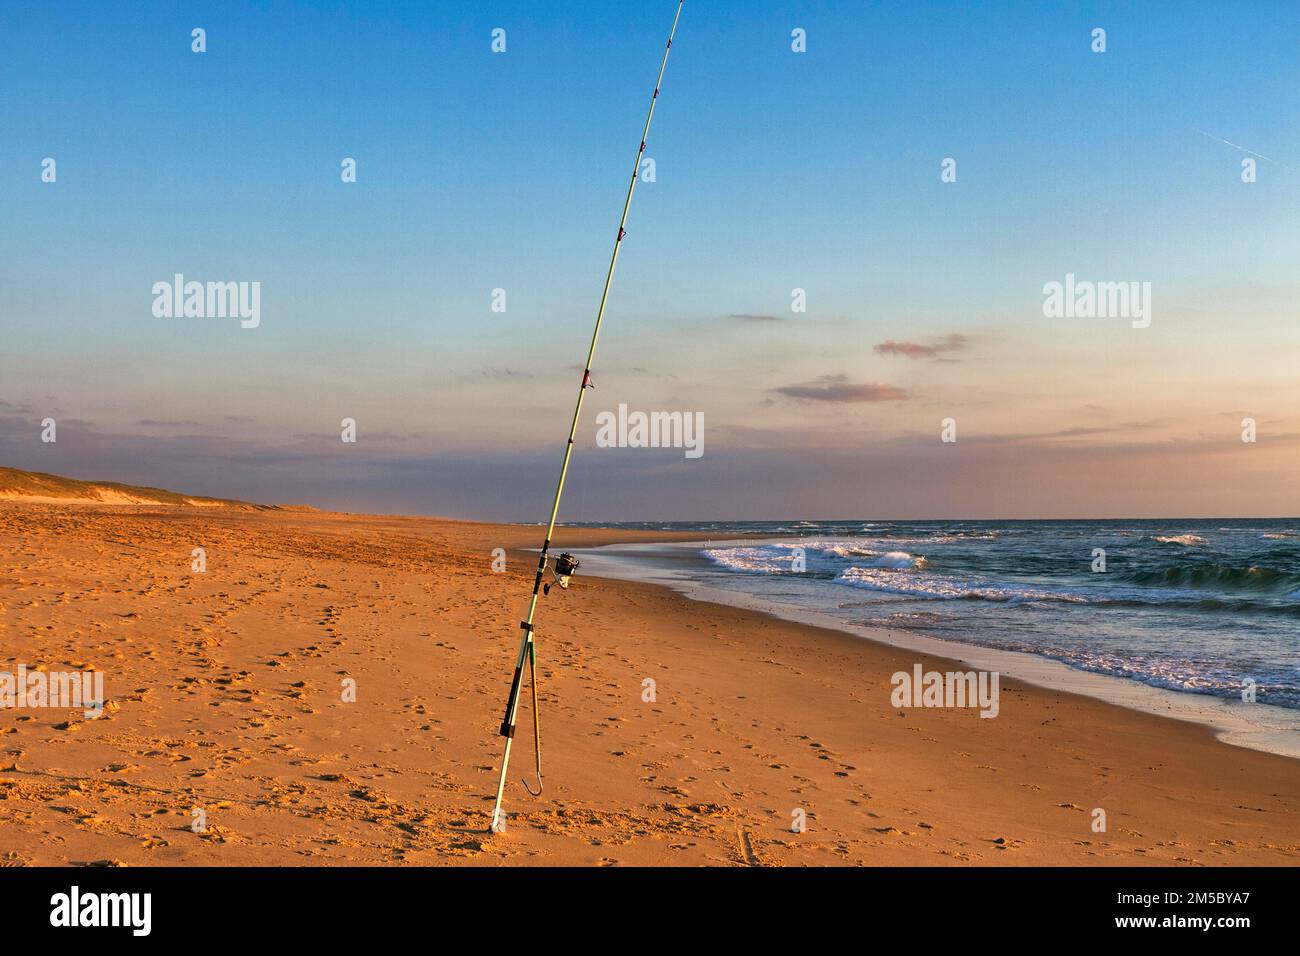 Surf fishing, fishing rod stands on the beach, Soustons Plage